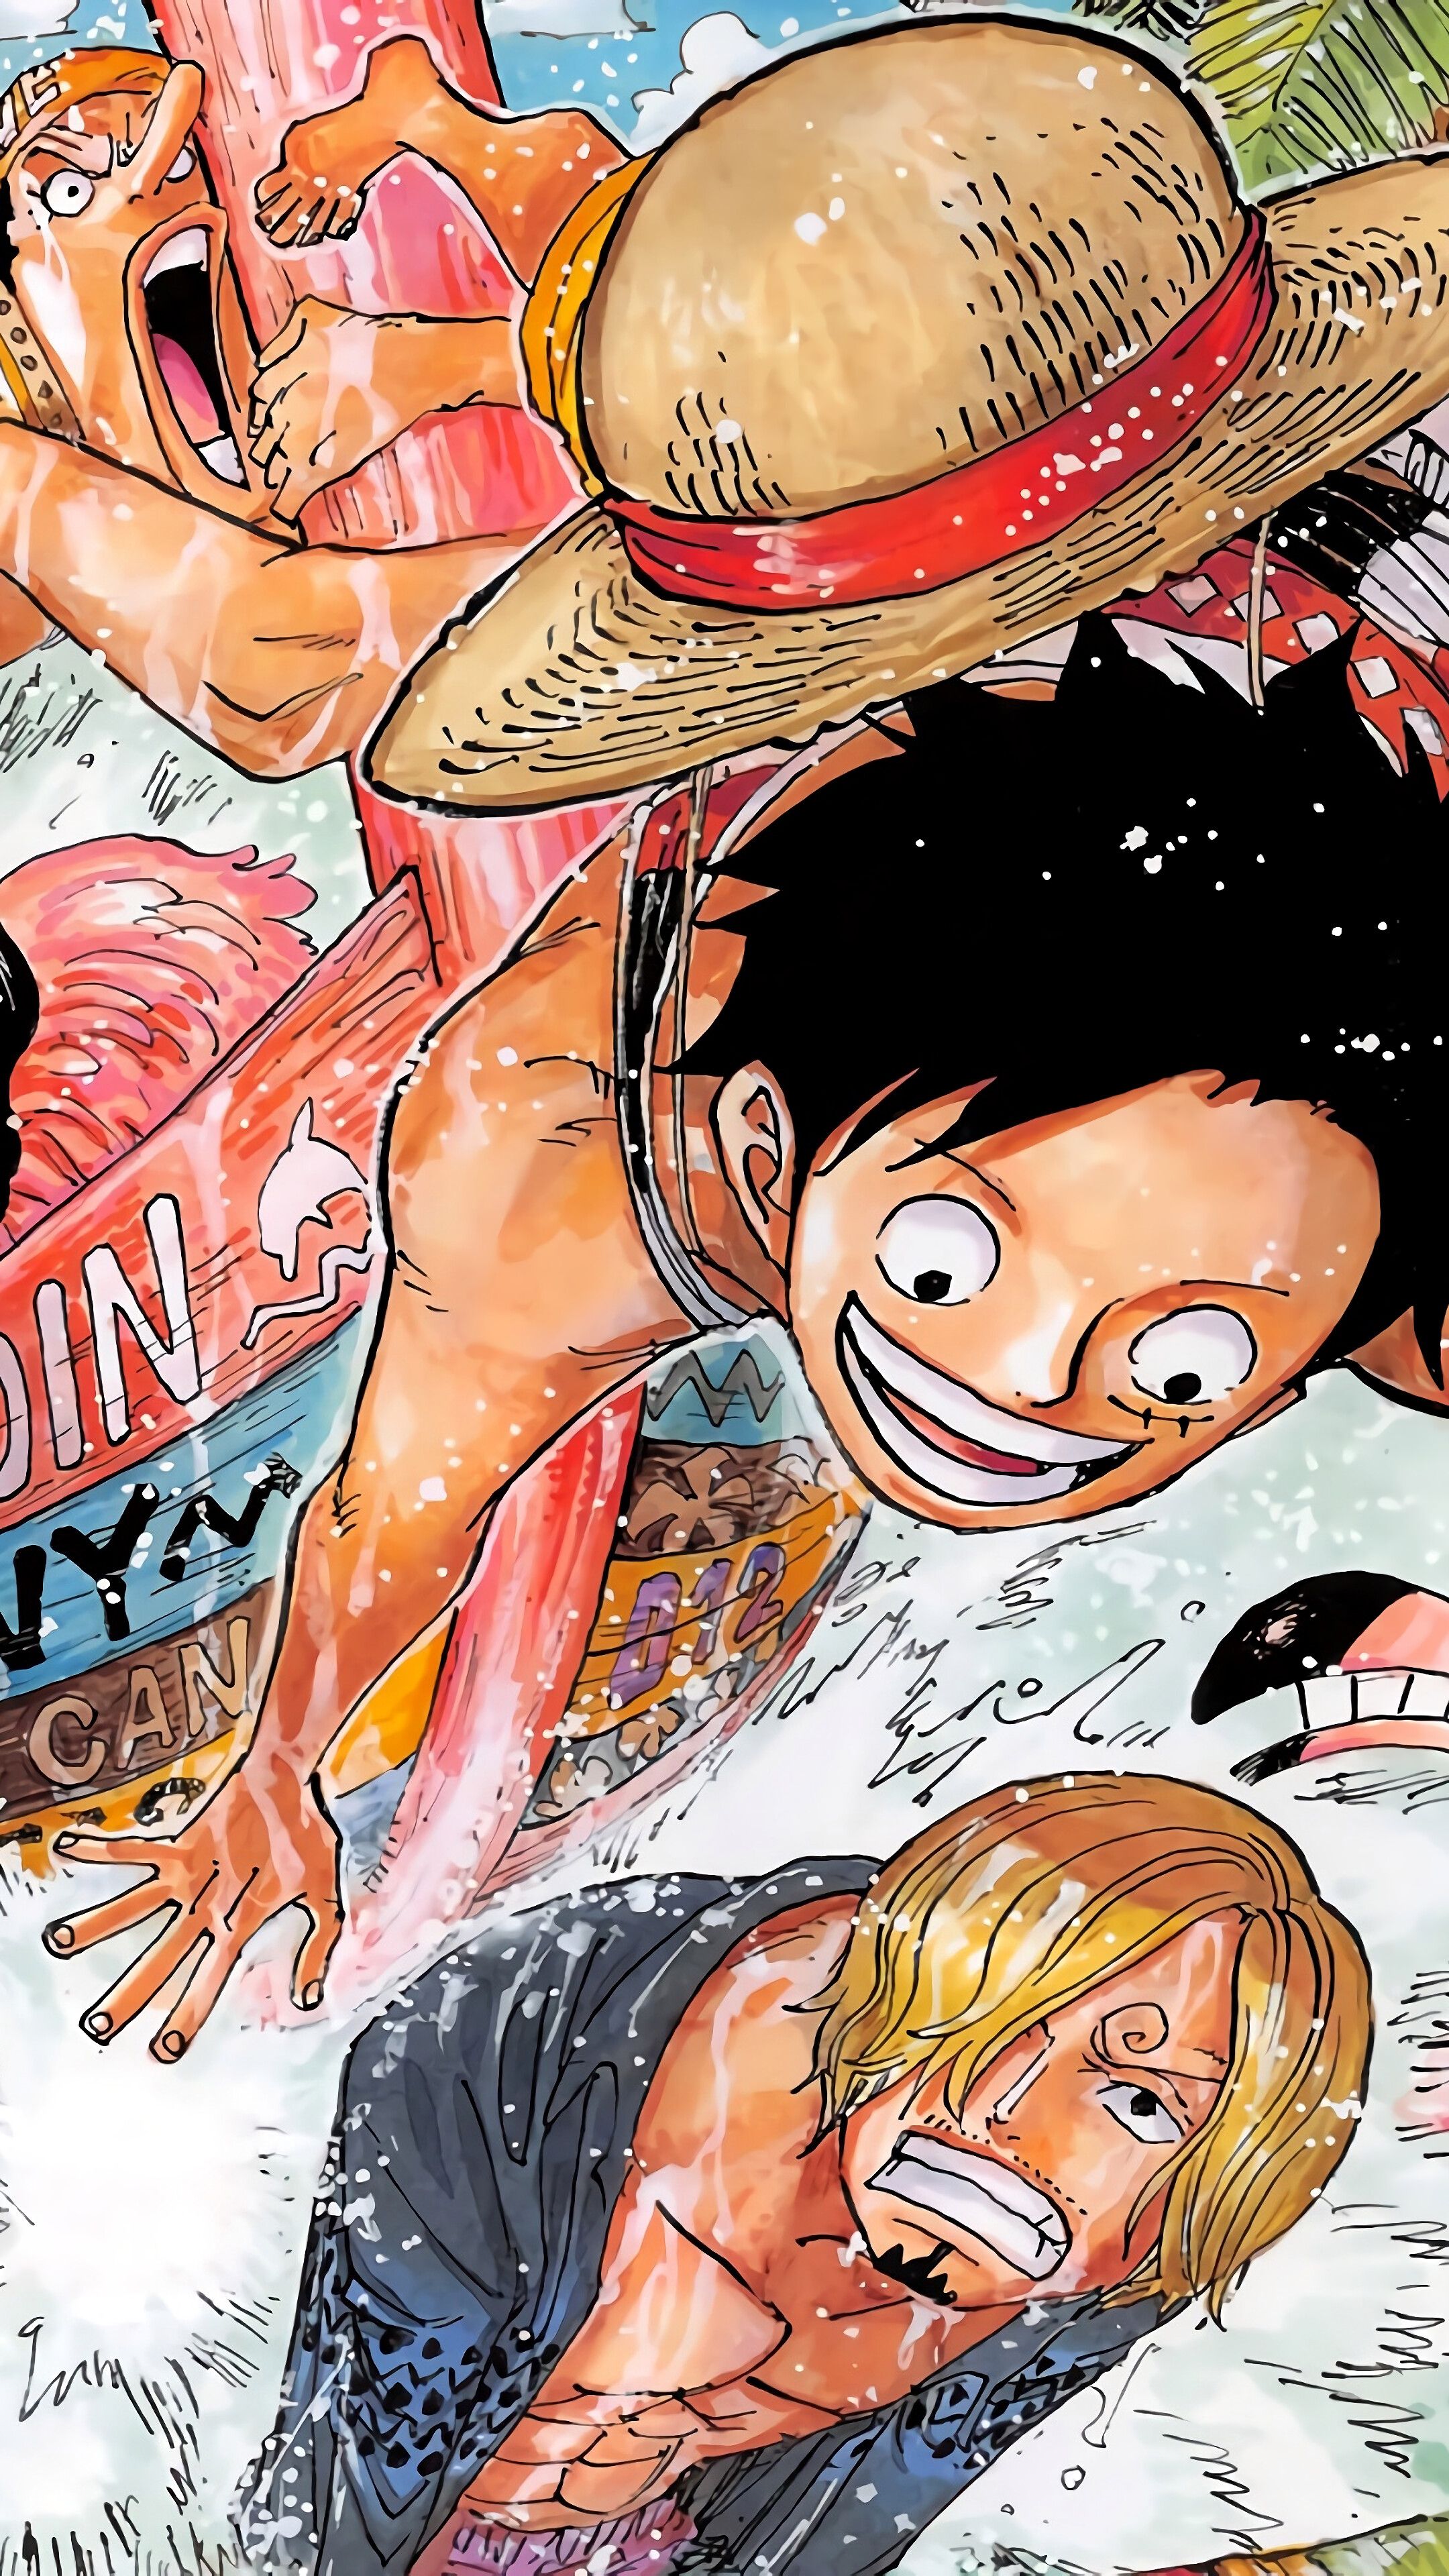 One piece anime characters in a cartoon - One Piece